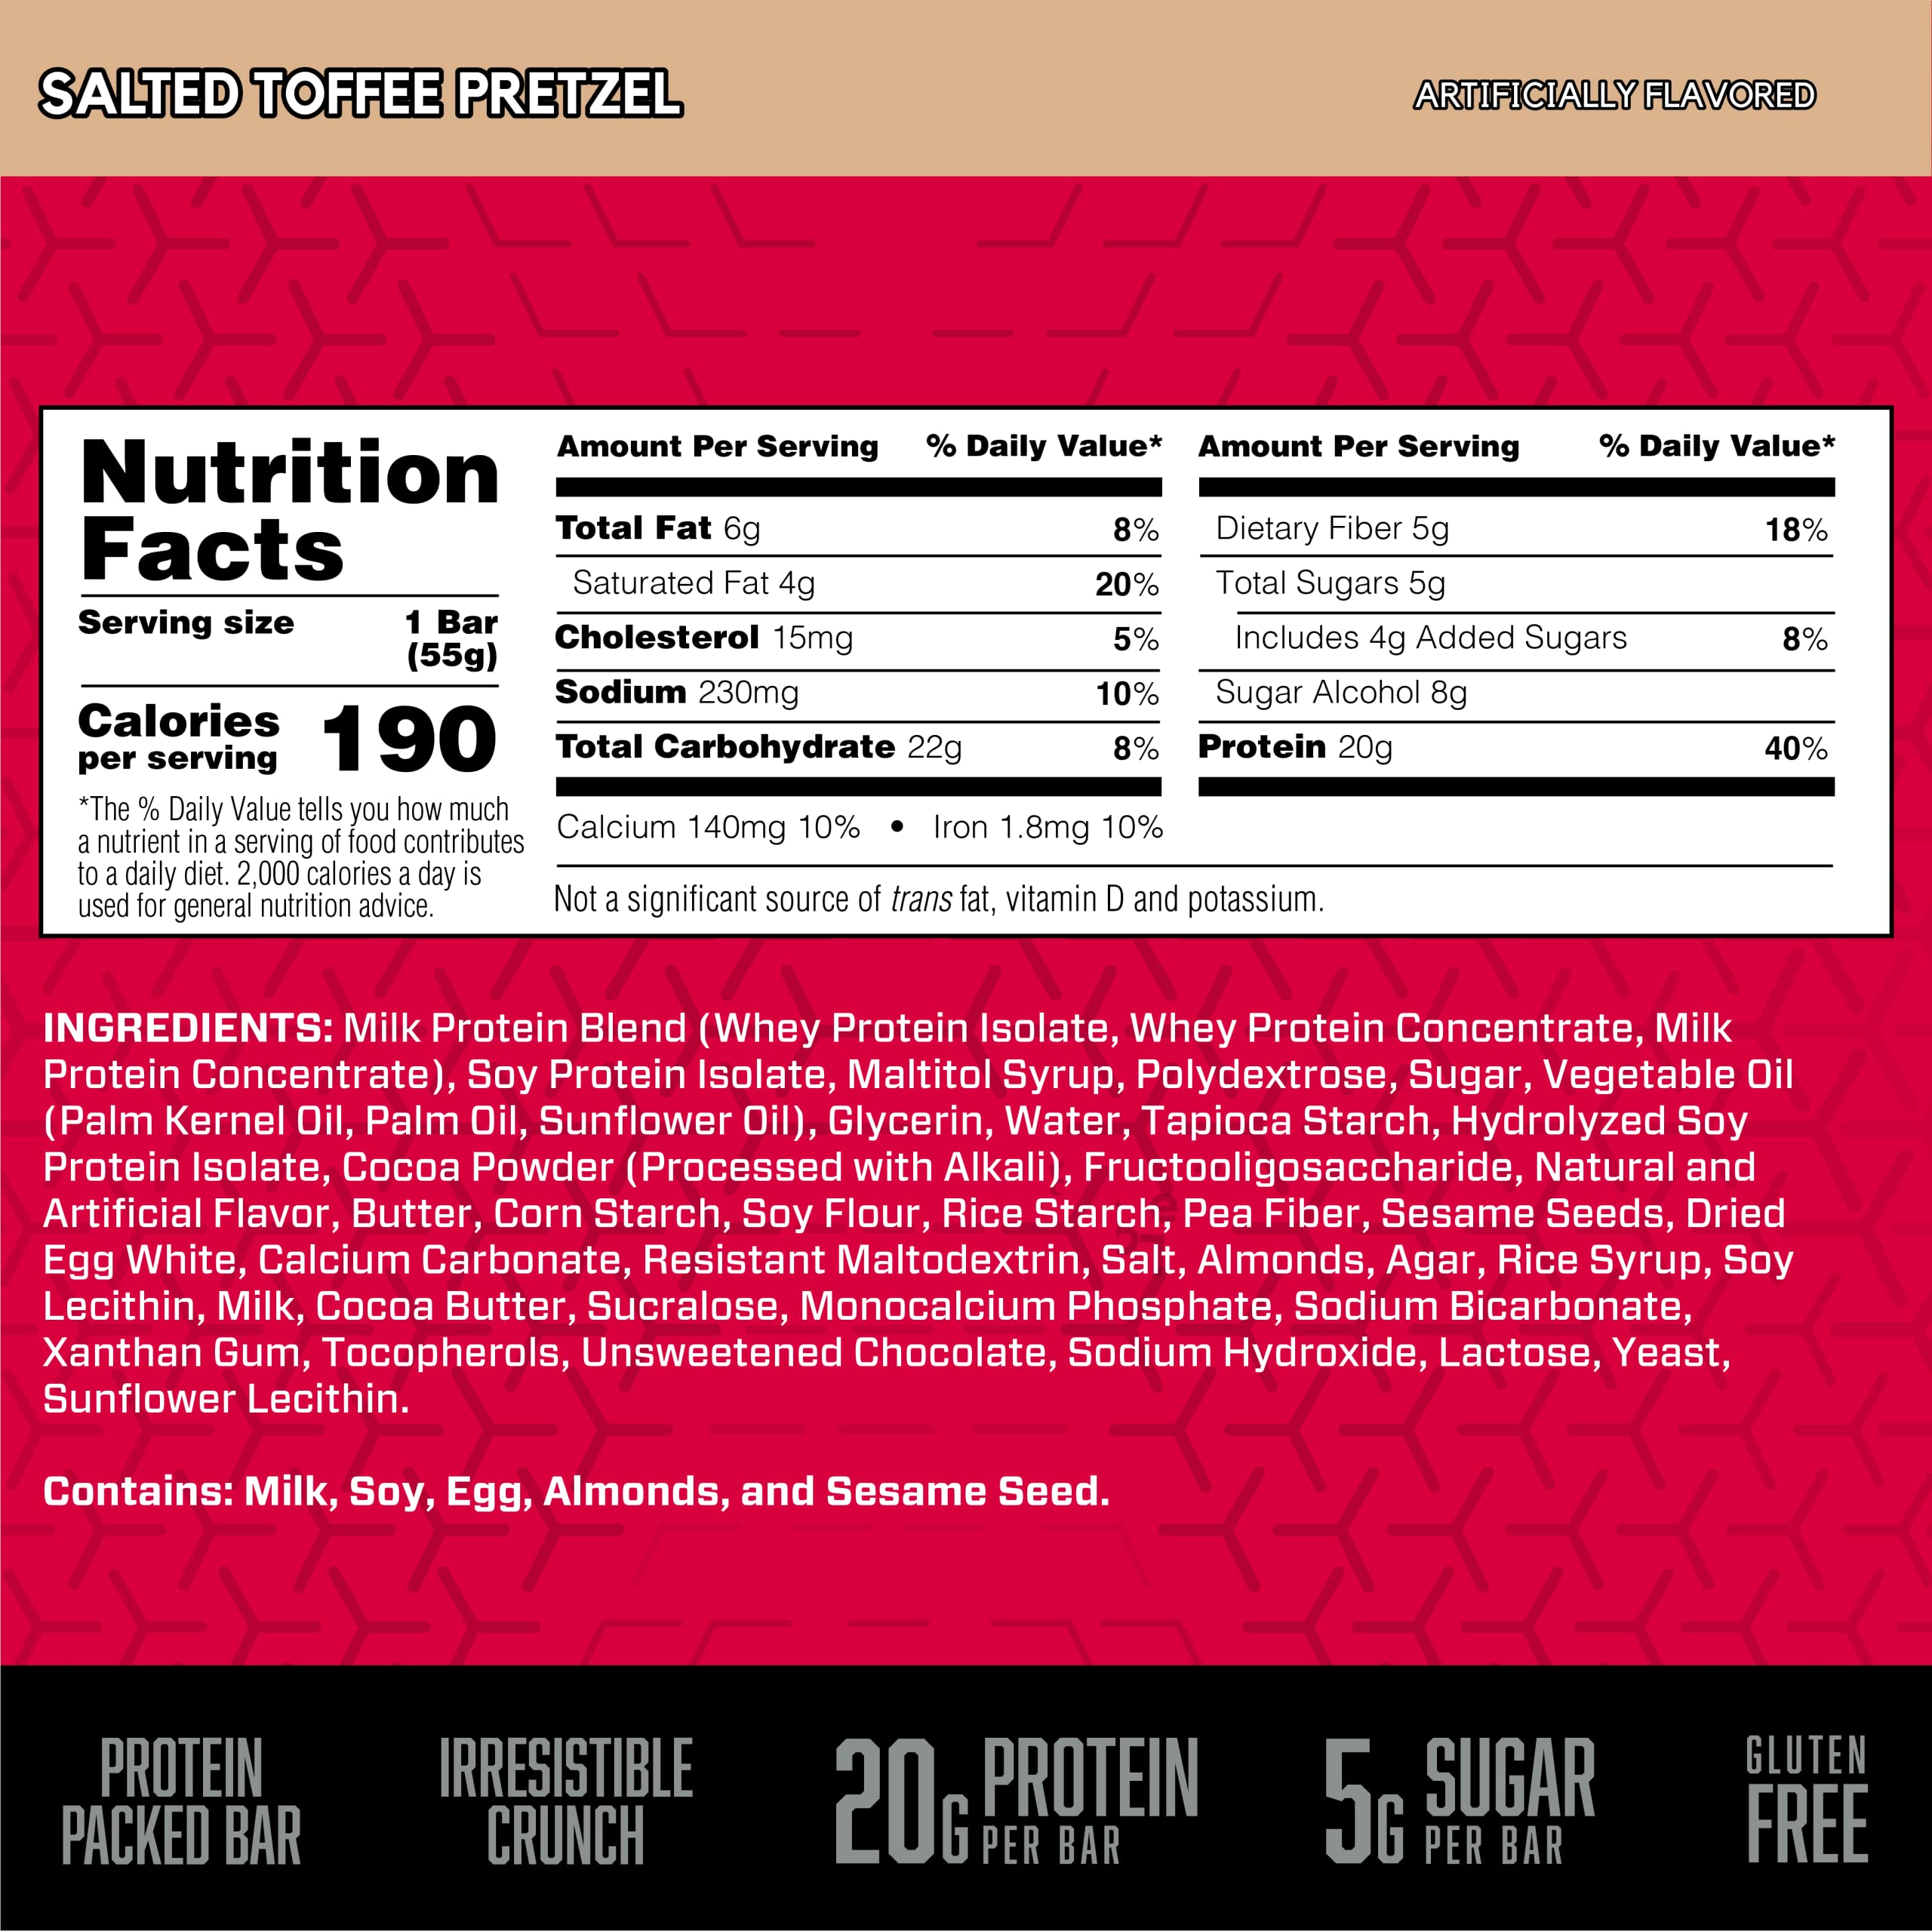 BSN Protein Bars - Protein Crisp Bar by Syntha-6, Whey Protein, 20g of Protein, Gluten Free, Low Sugar, Salted Toffee Pretzel, 12 Count